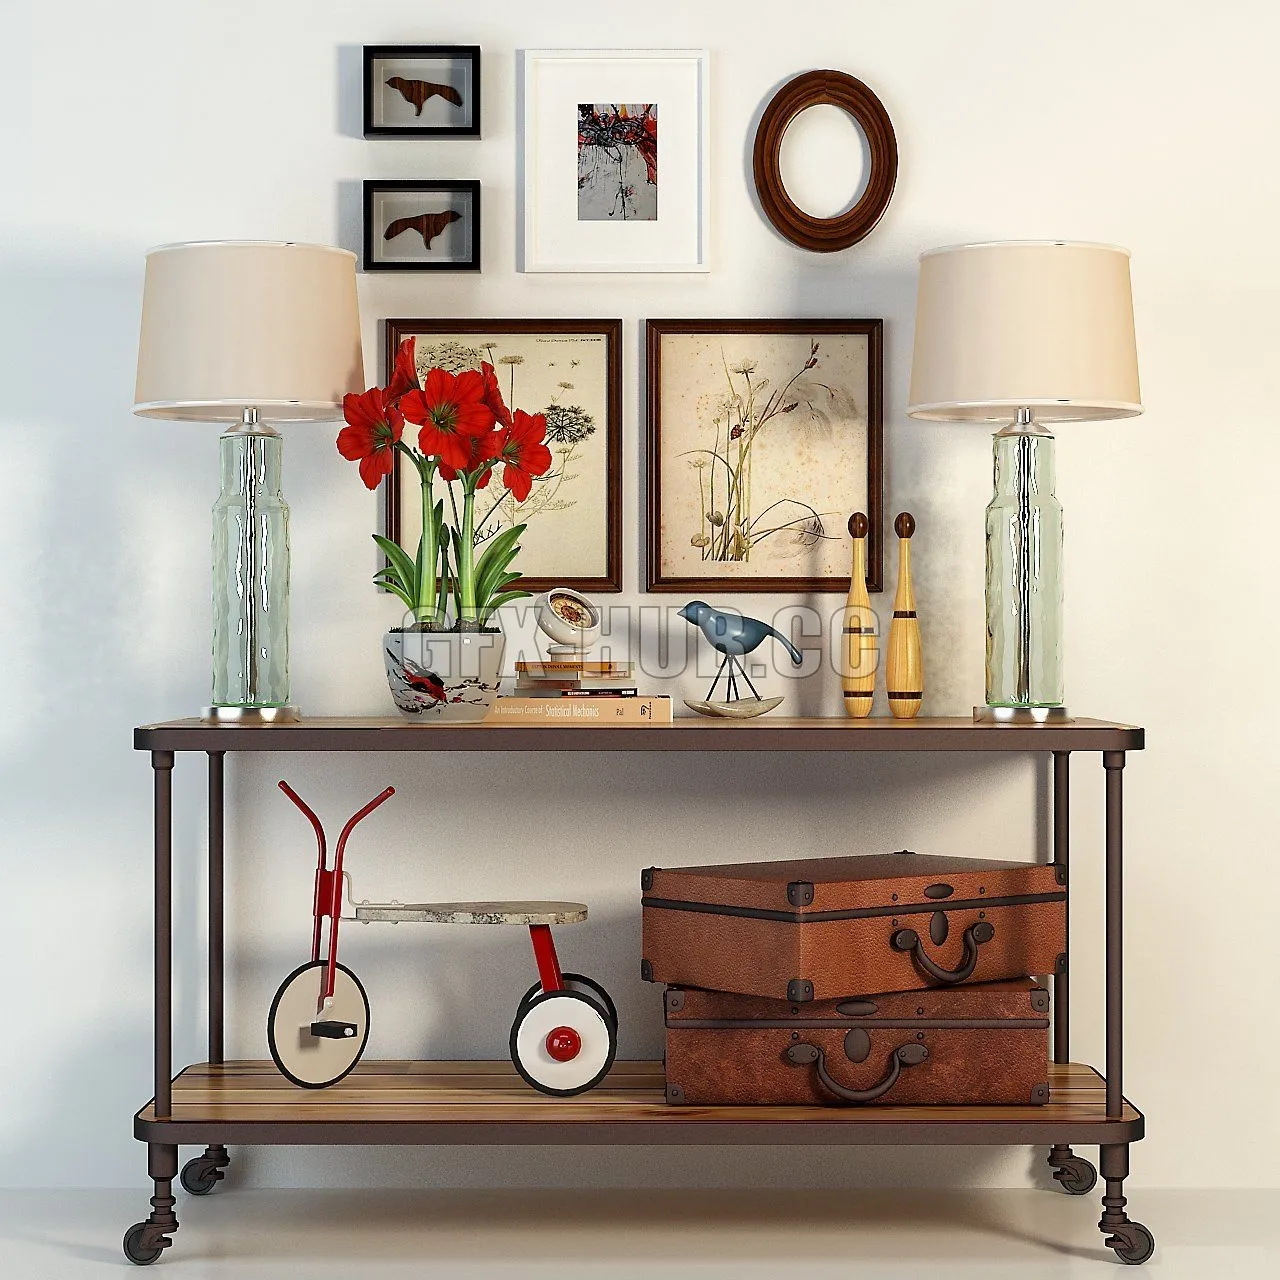 TABLE – Console decorative table